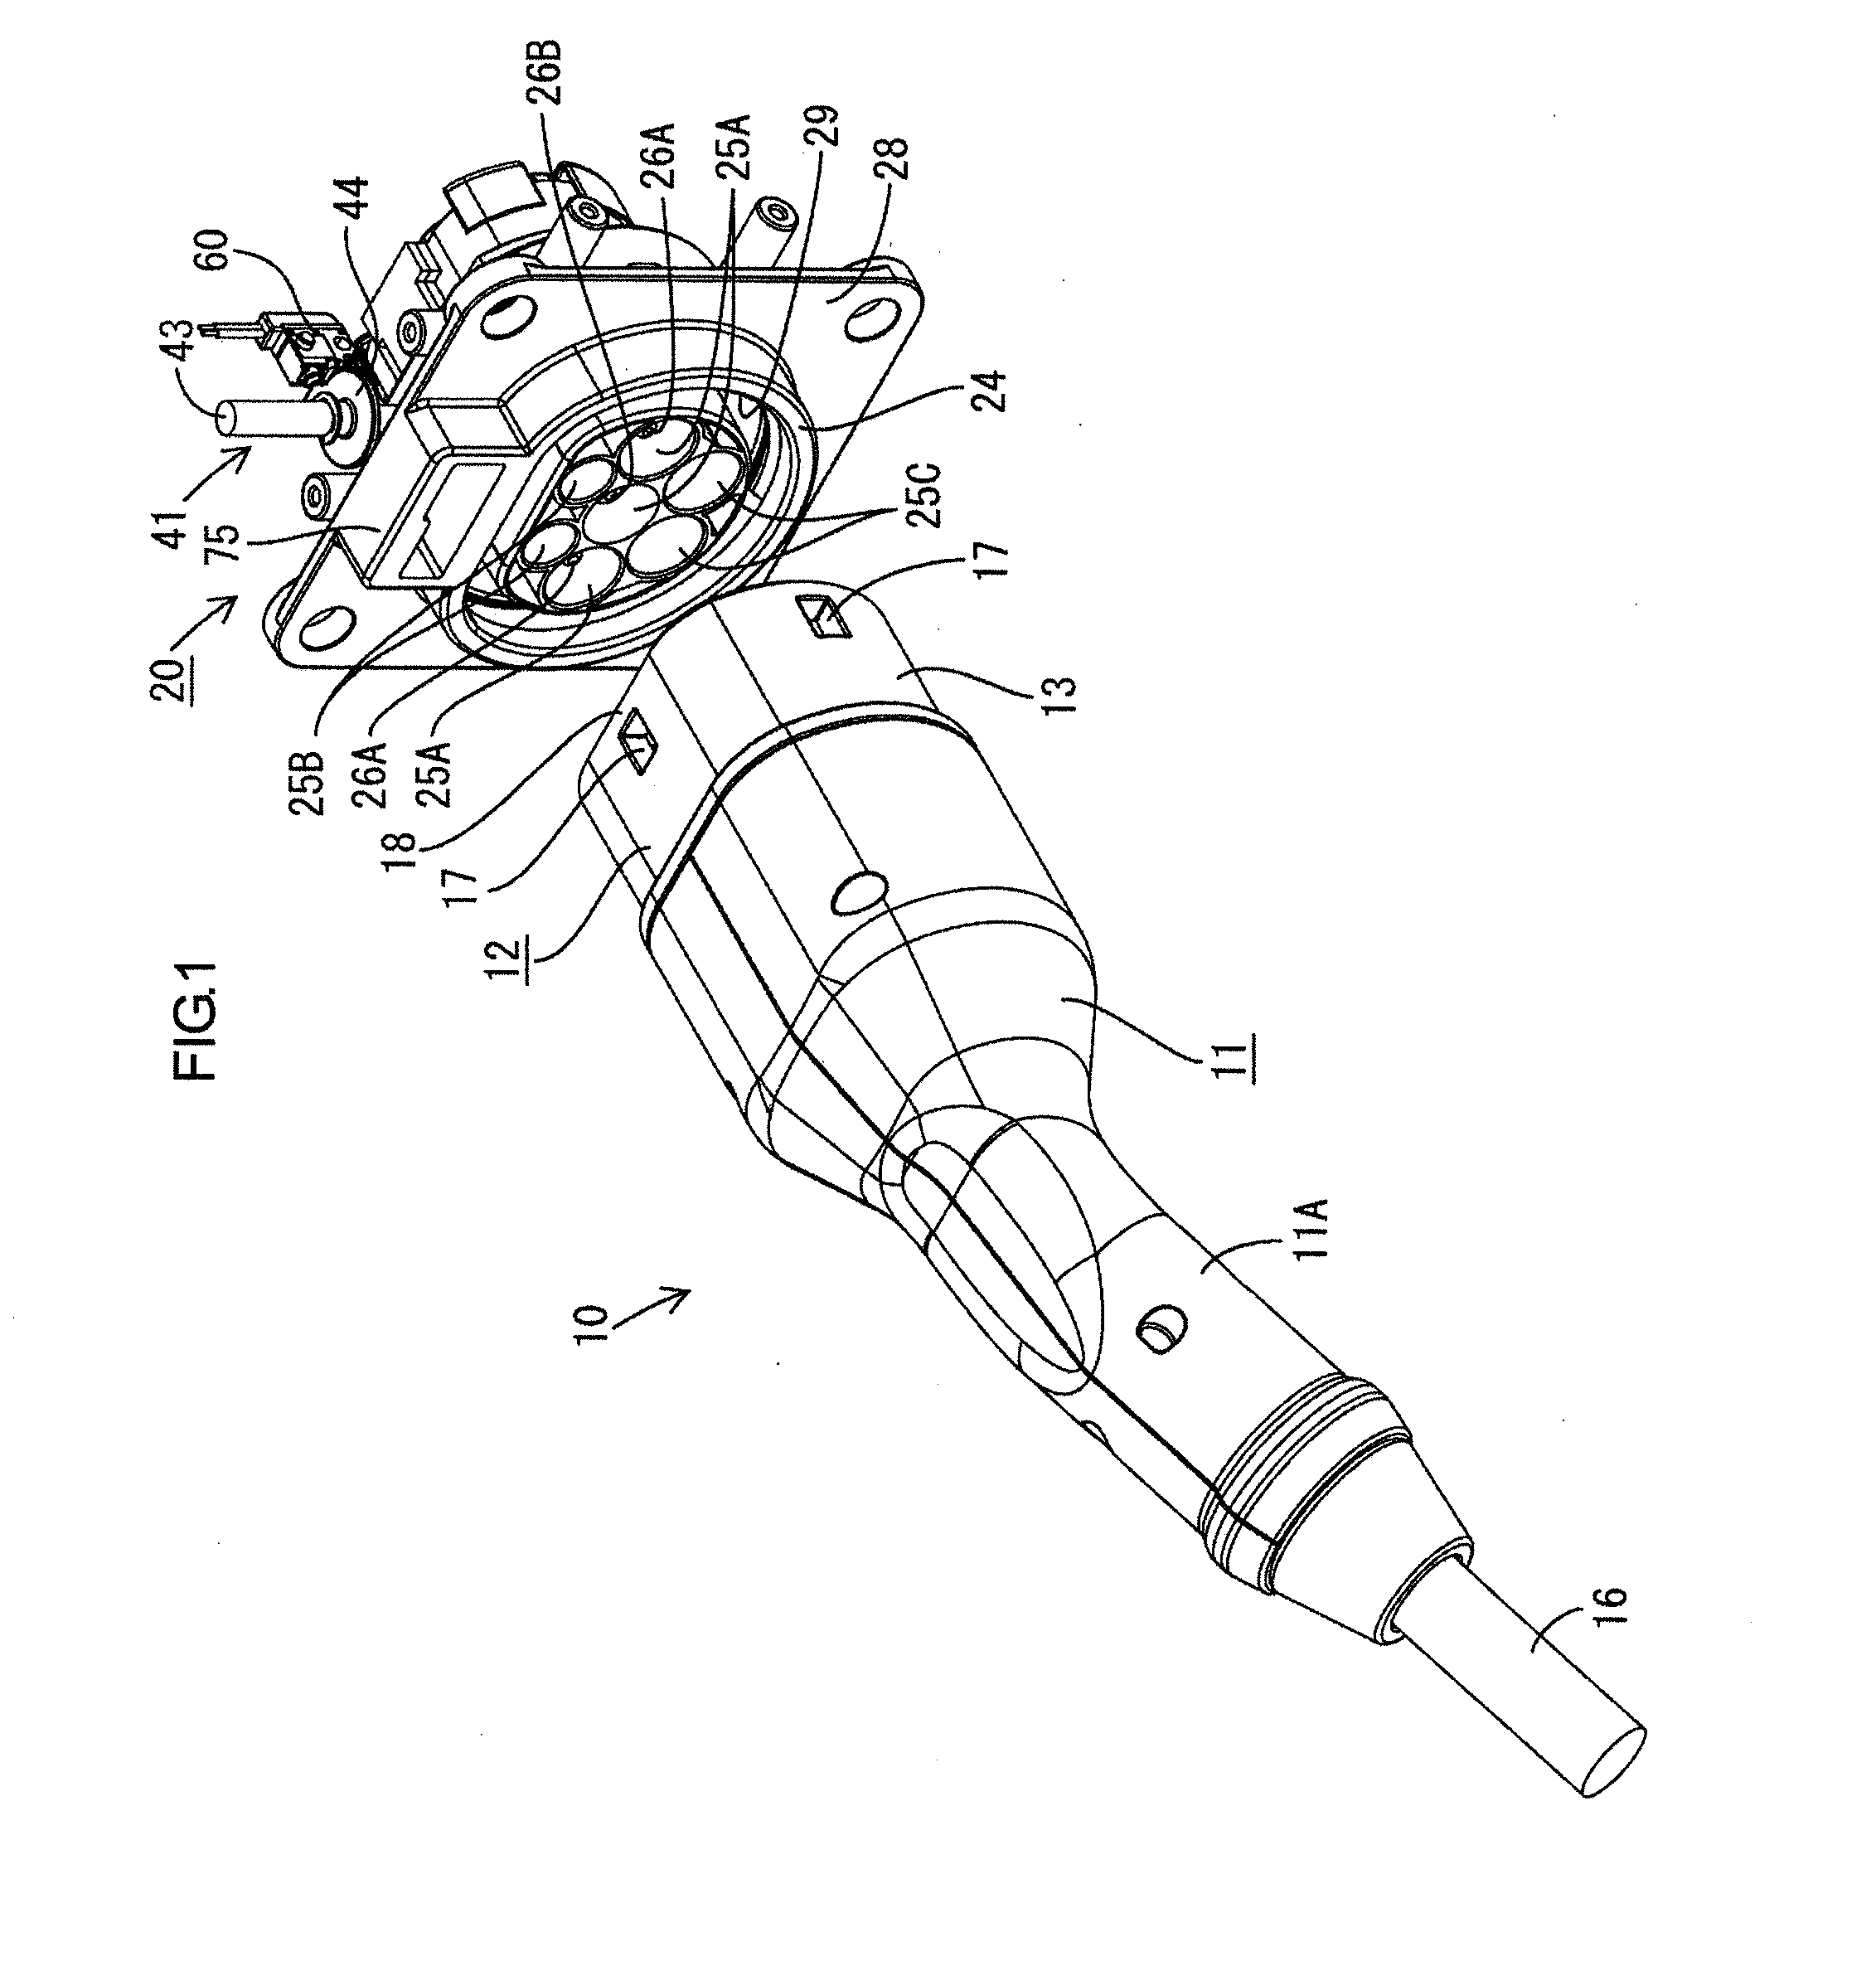 Vehicle charging device